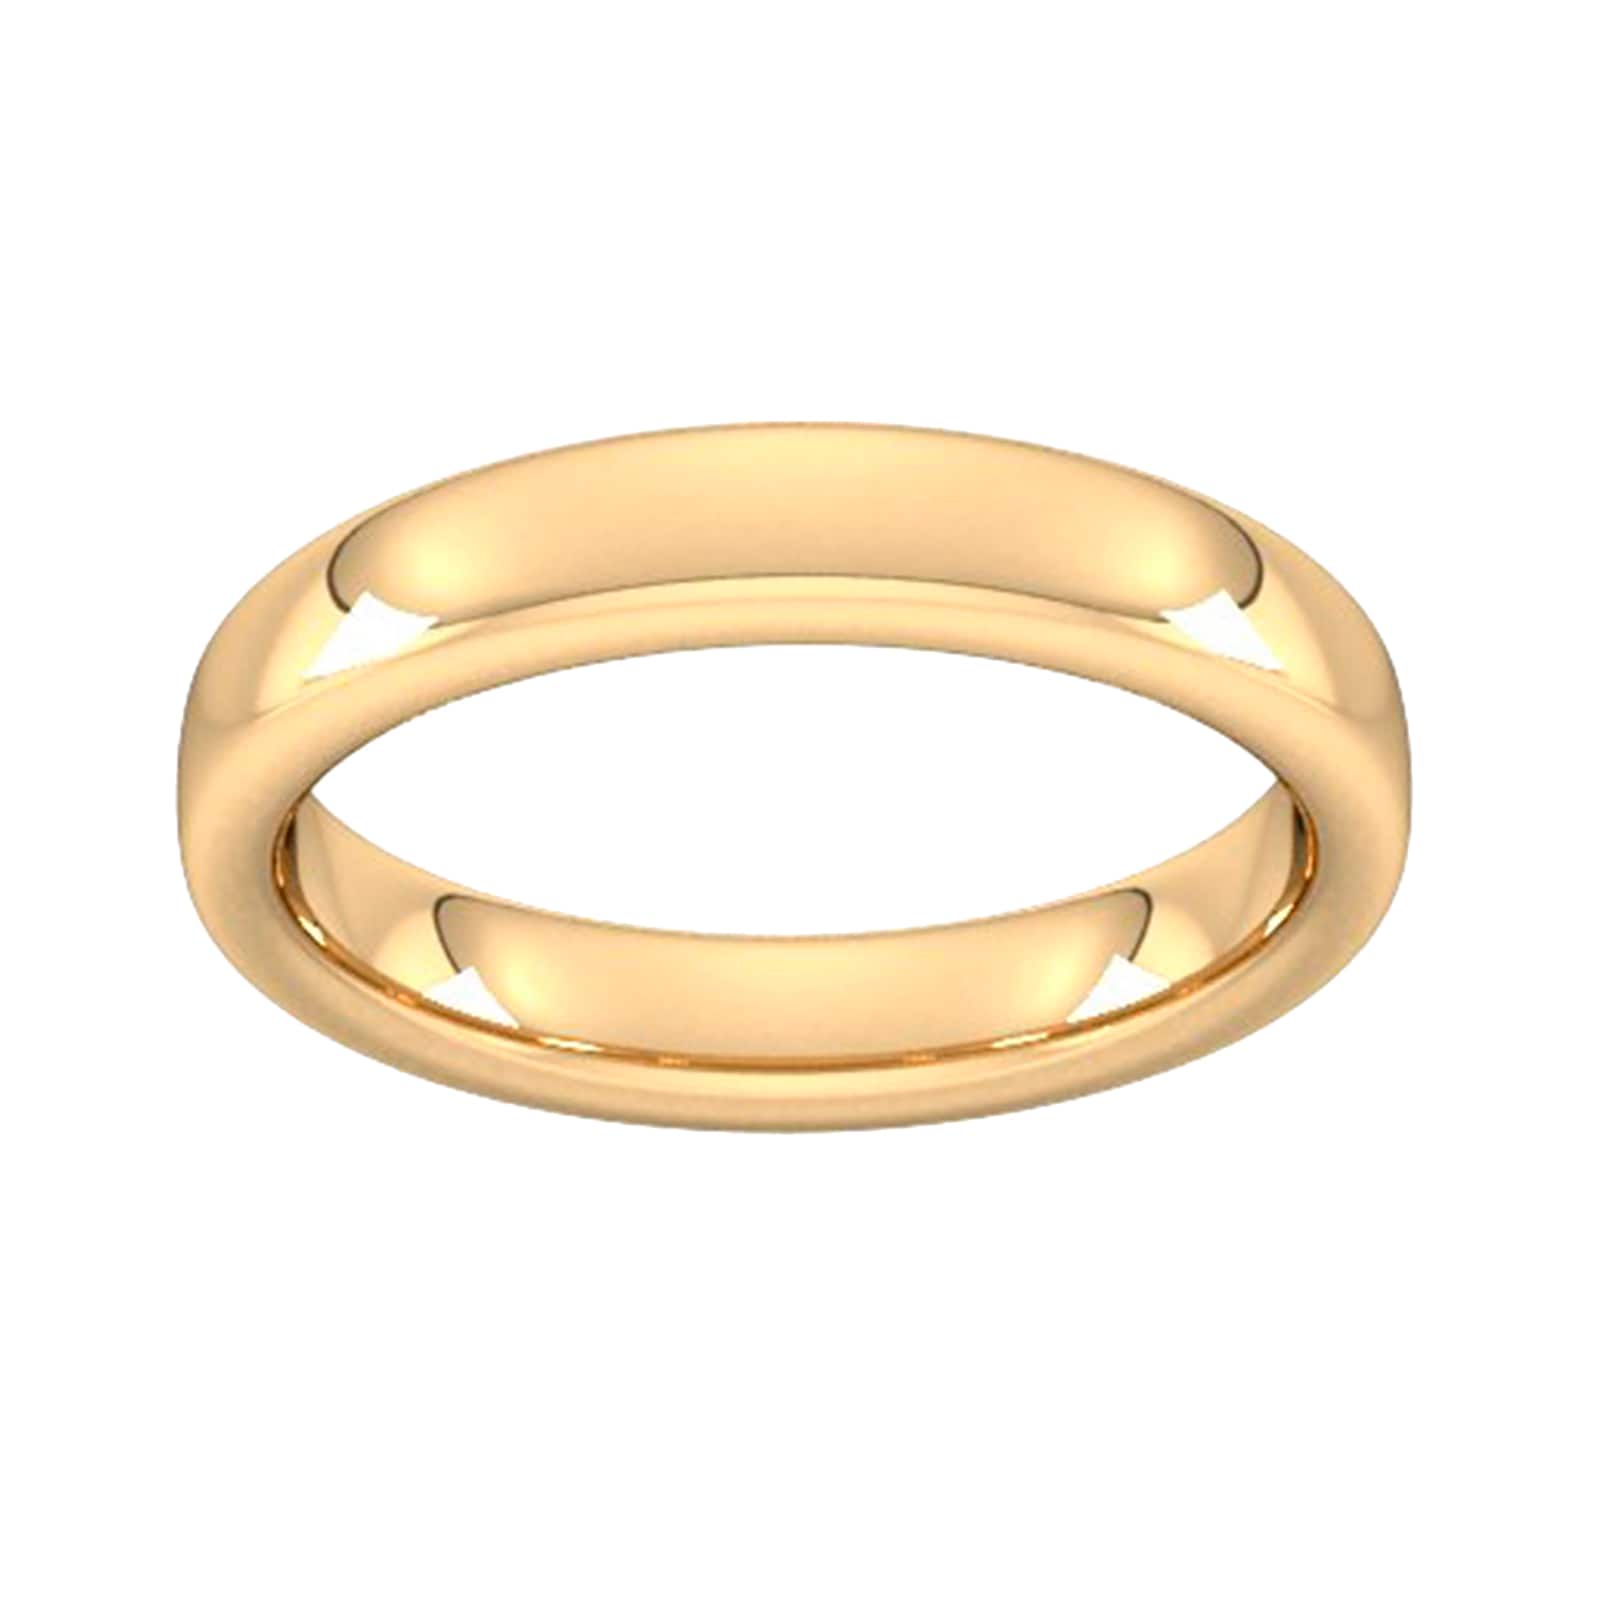 4mm Slight Court Extra Heavy Wedding Ring In 9 Carat Yellow Gold - Ring Size M